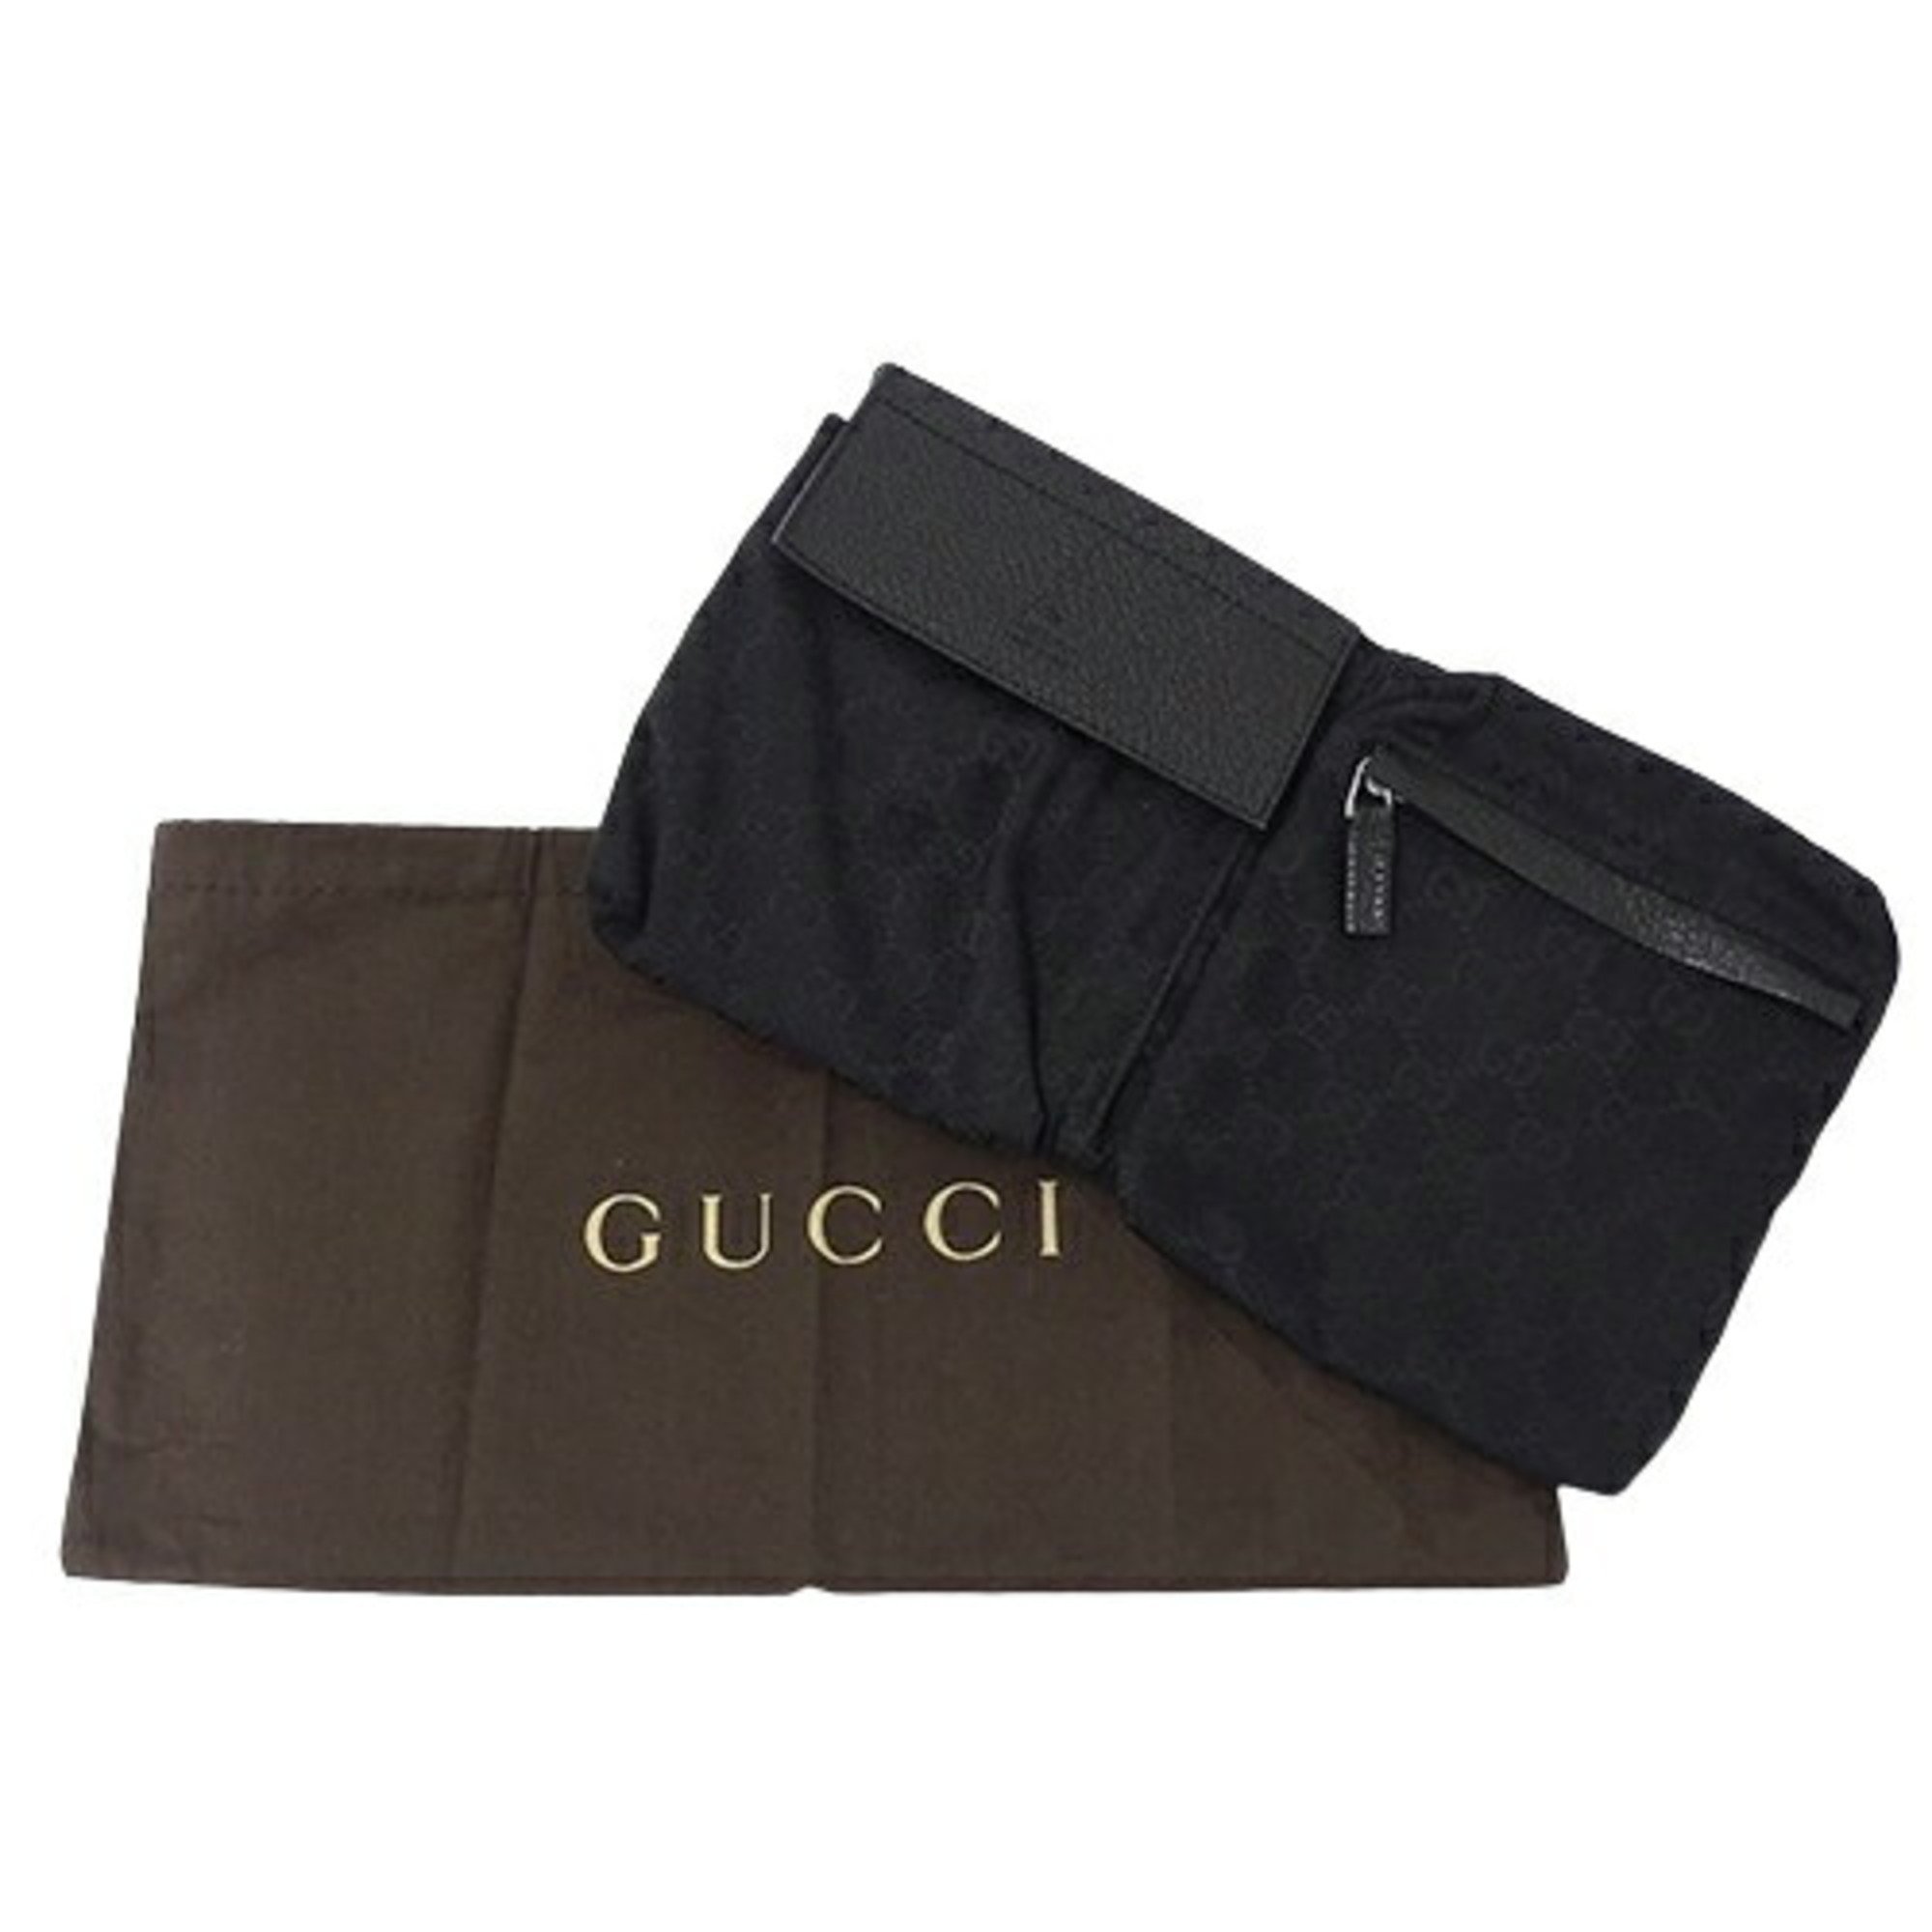 GUCCI Bags for Women and Men, Body Bags, Waist GG Canvas, Black, 285866, Compact